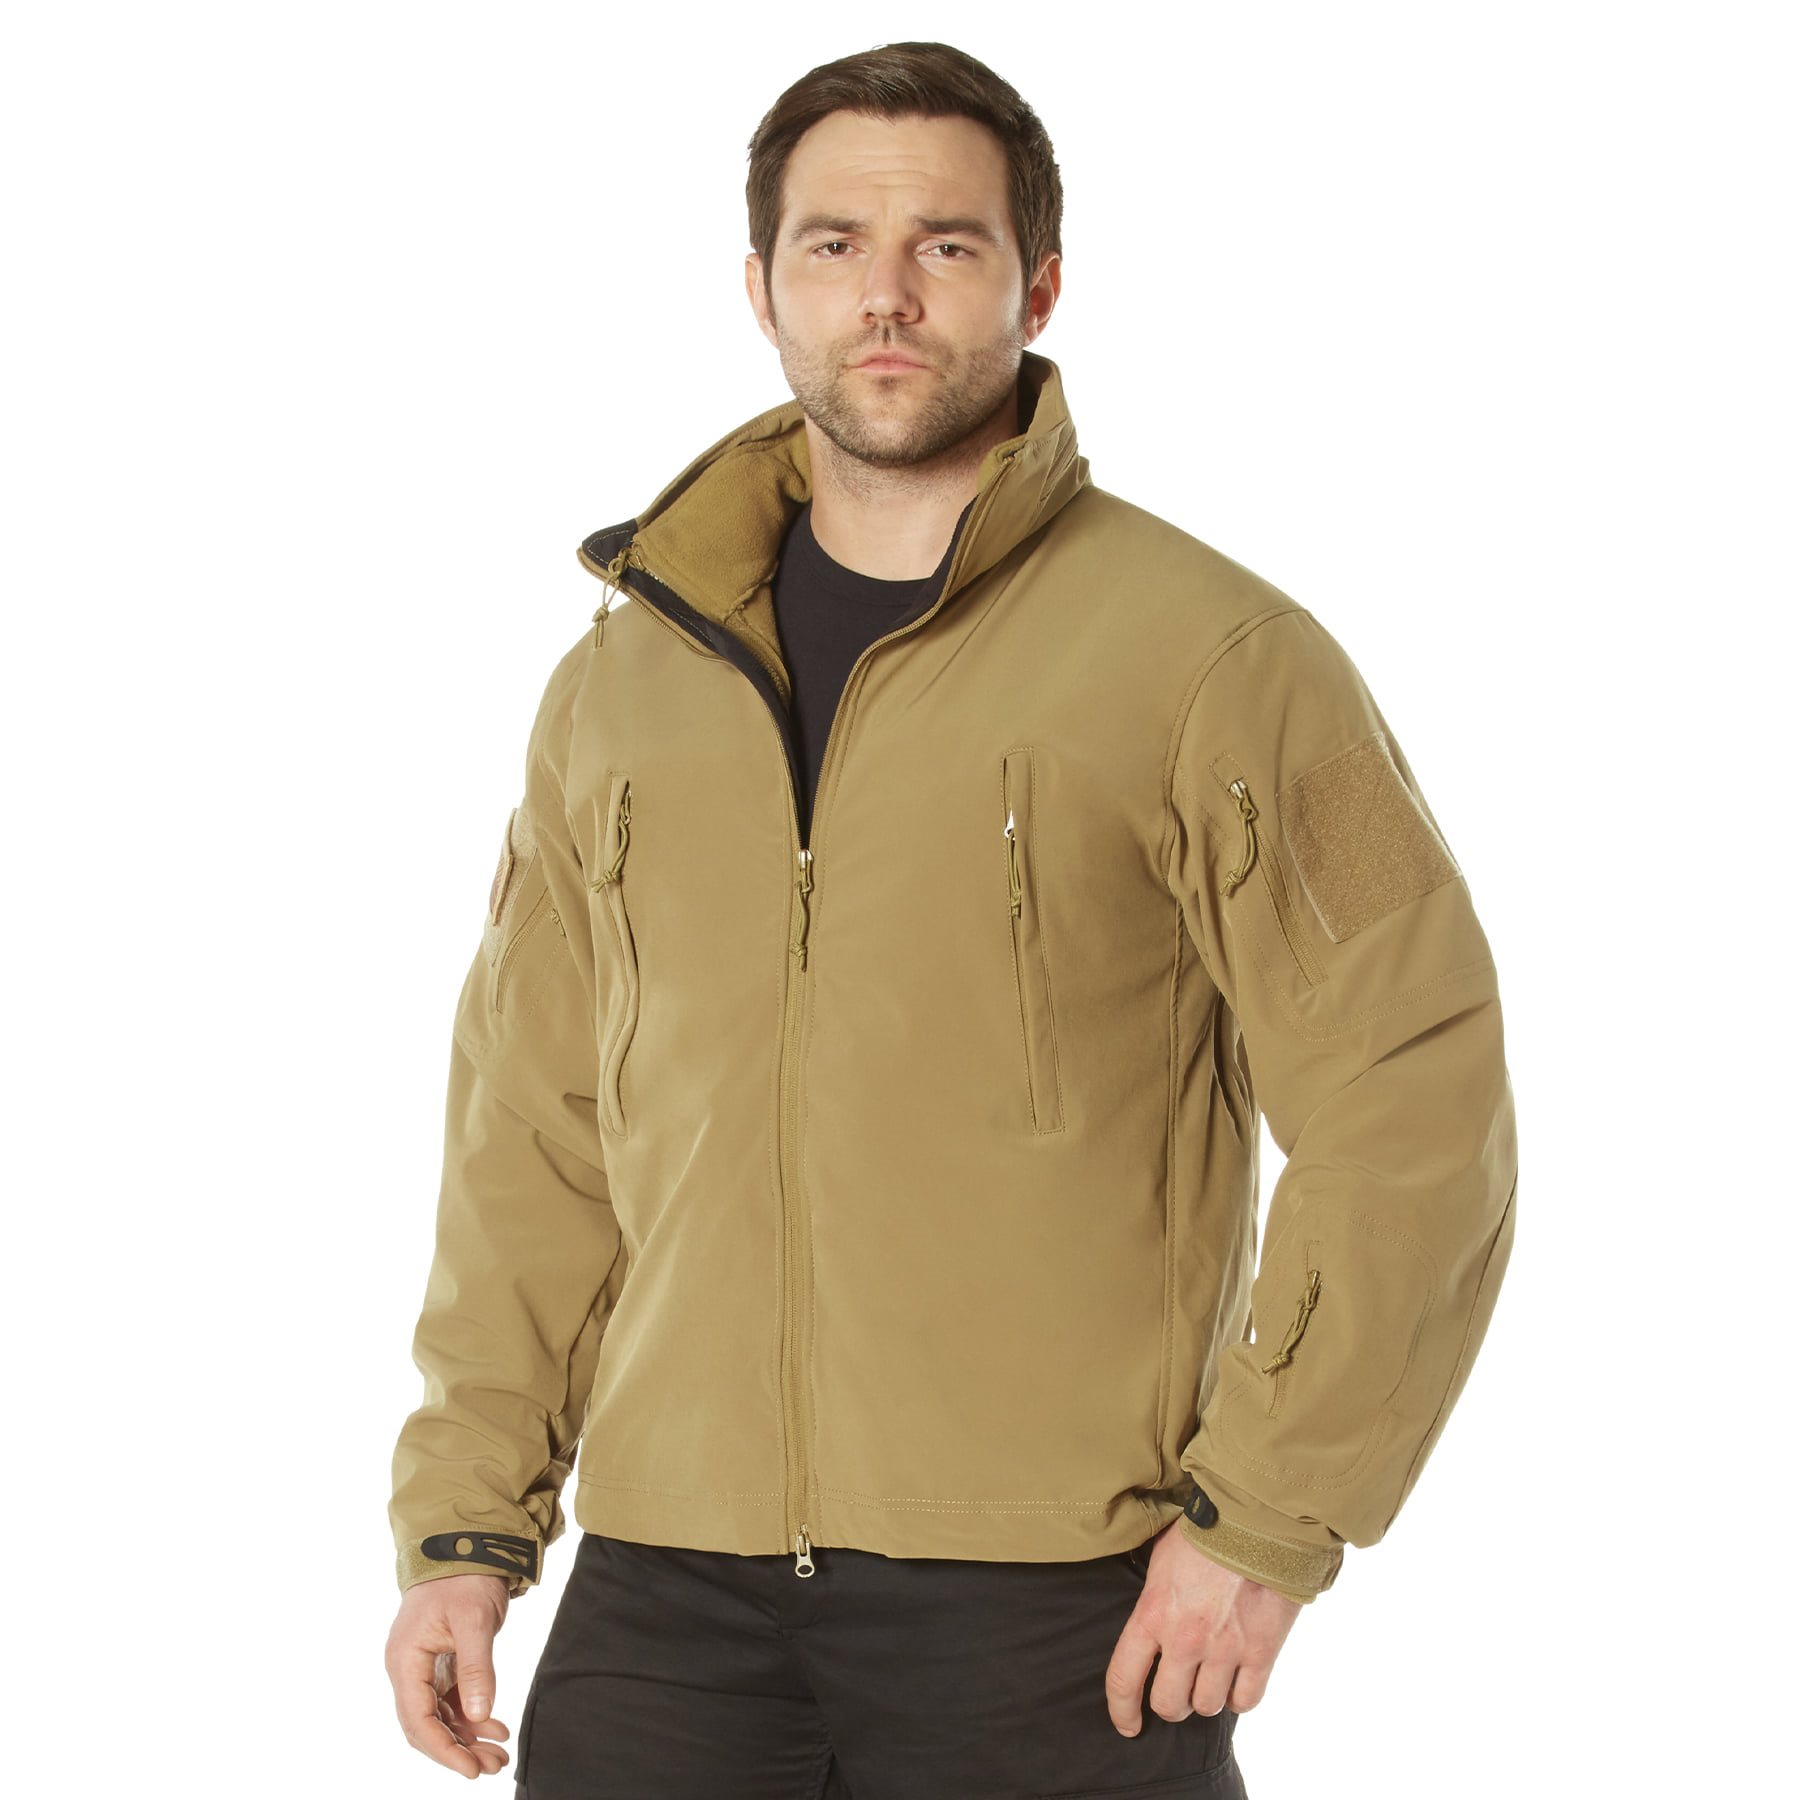 3-in-1 Spec Ops Soft Shell Jacket COYOTE ROTHCO 3128 L-11